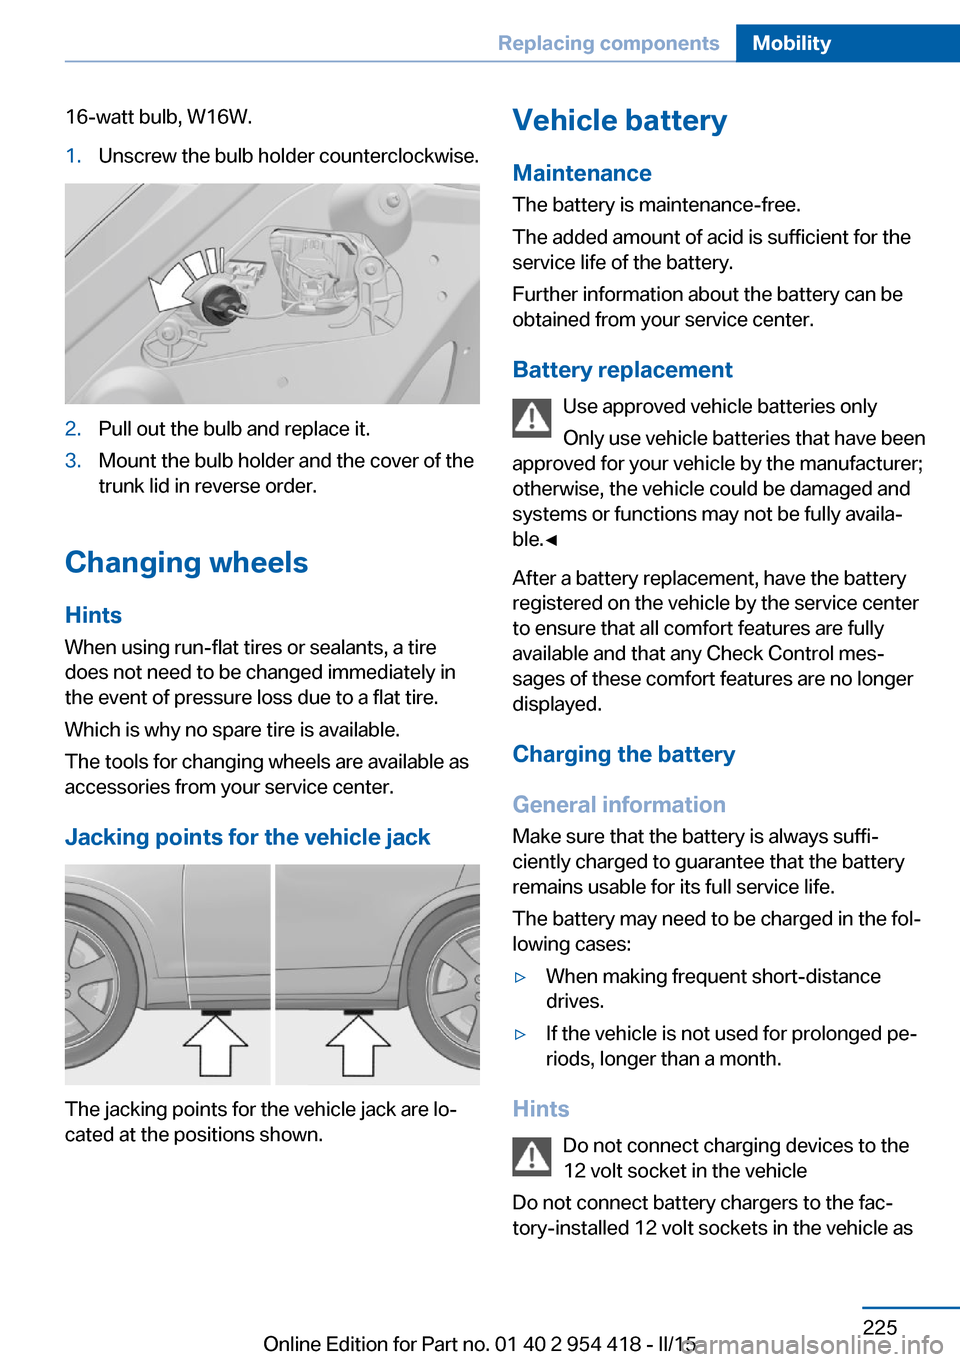 BMW 6 SERIES CONVERTIBLE 2016 F12 Owners Manual 16-watt bulb, W16W.1.Unscrew the bulb holder counterclockwise.2.Pull out the bulb and replace it.3.Mount the bulb holder and the cover of the
trunk lid in reverse order.
Changing wheels
Hints
When usi